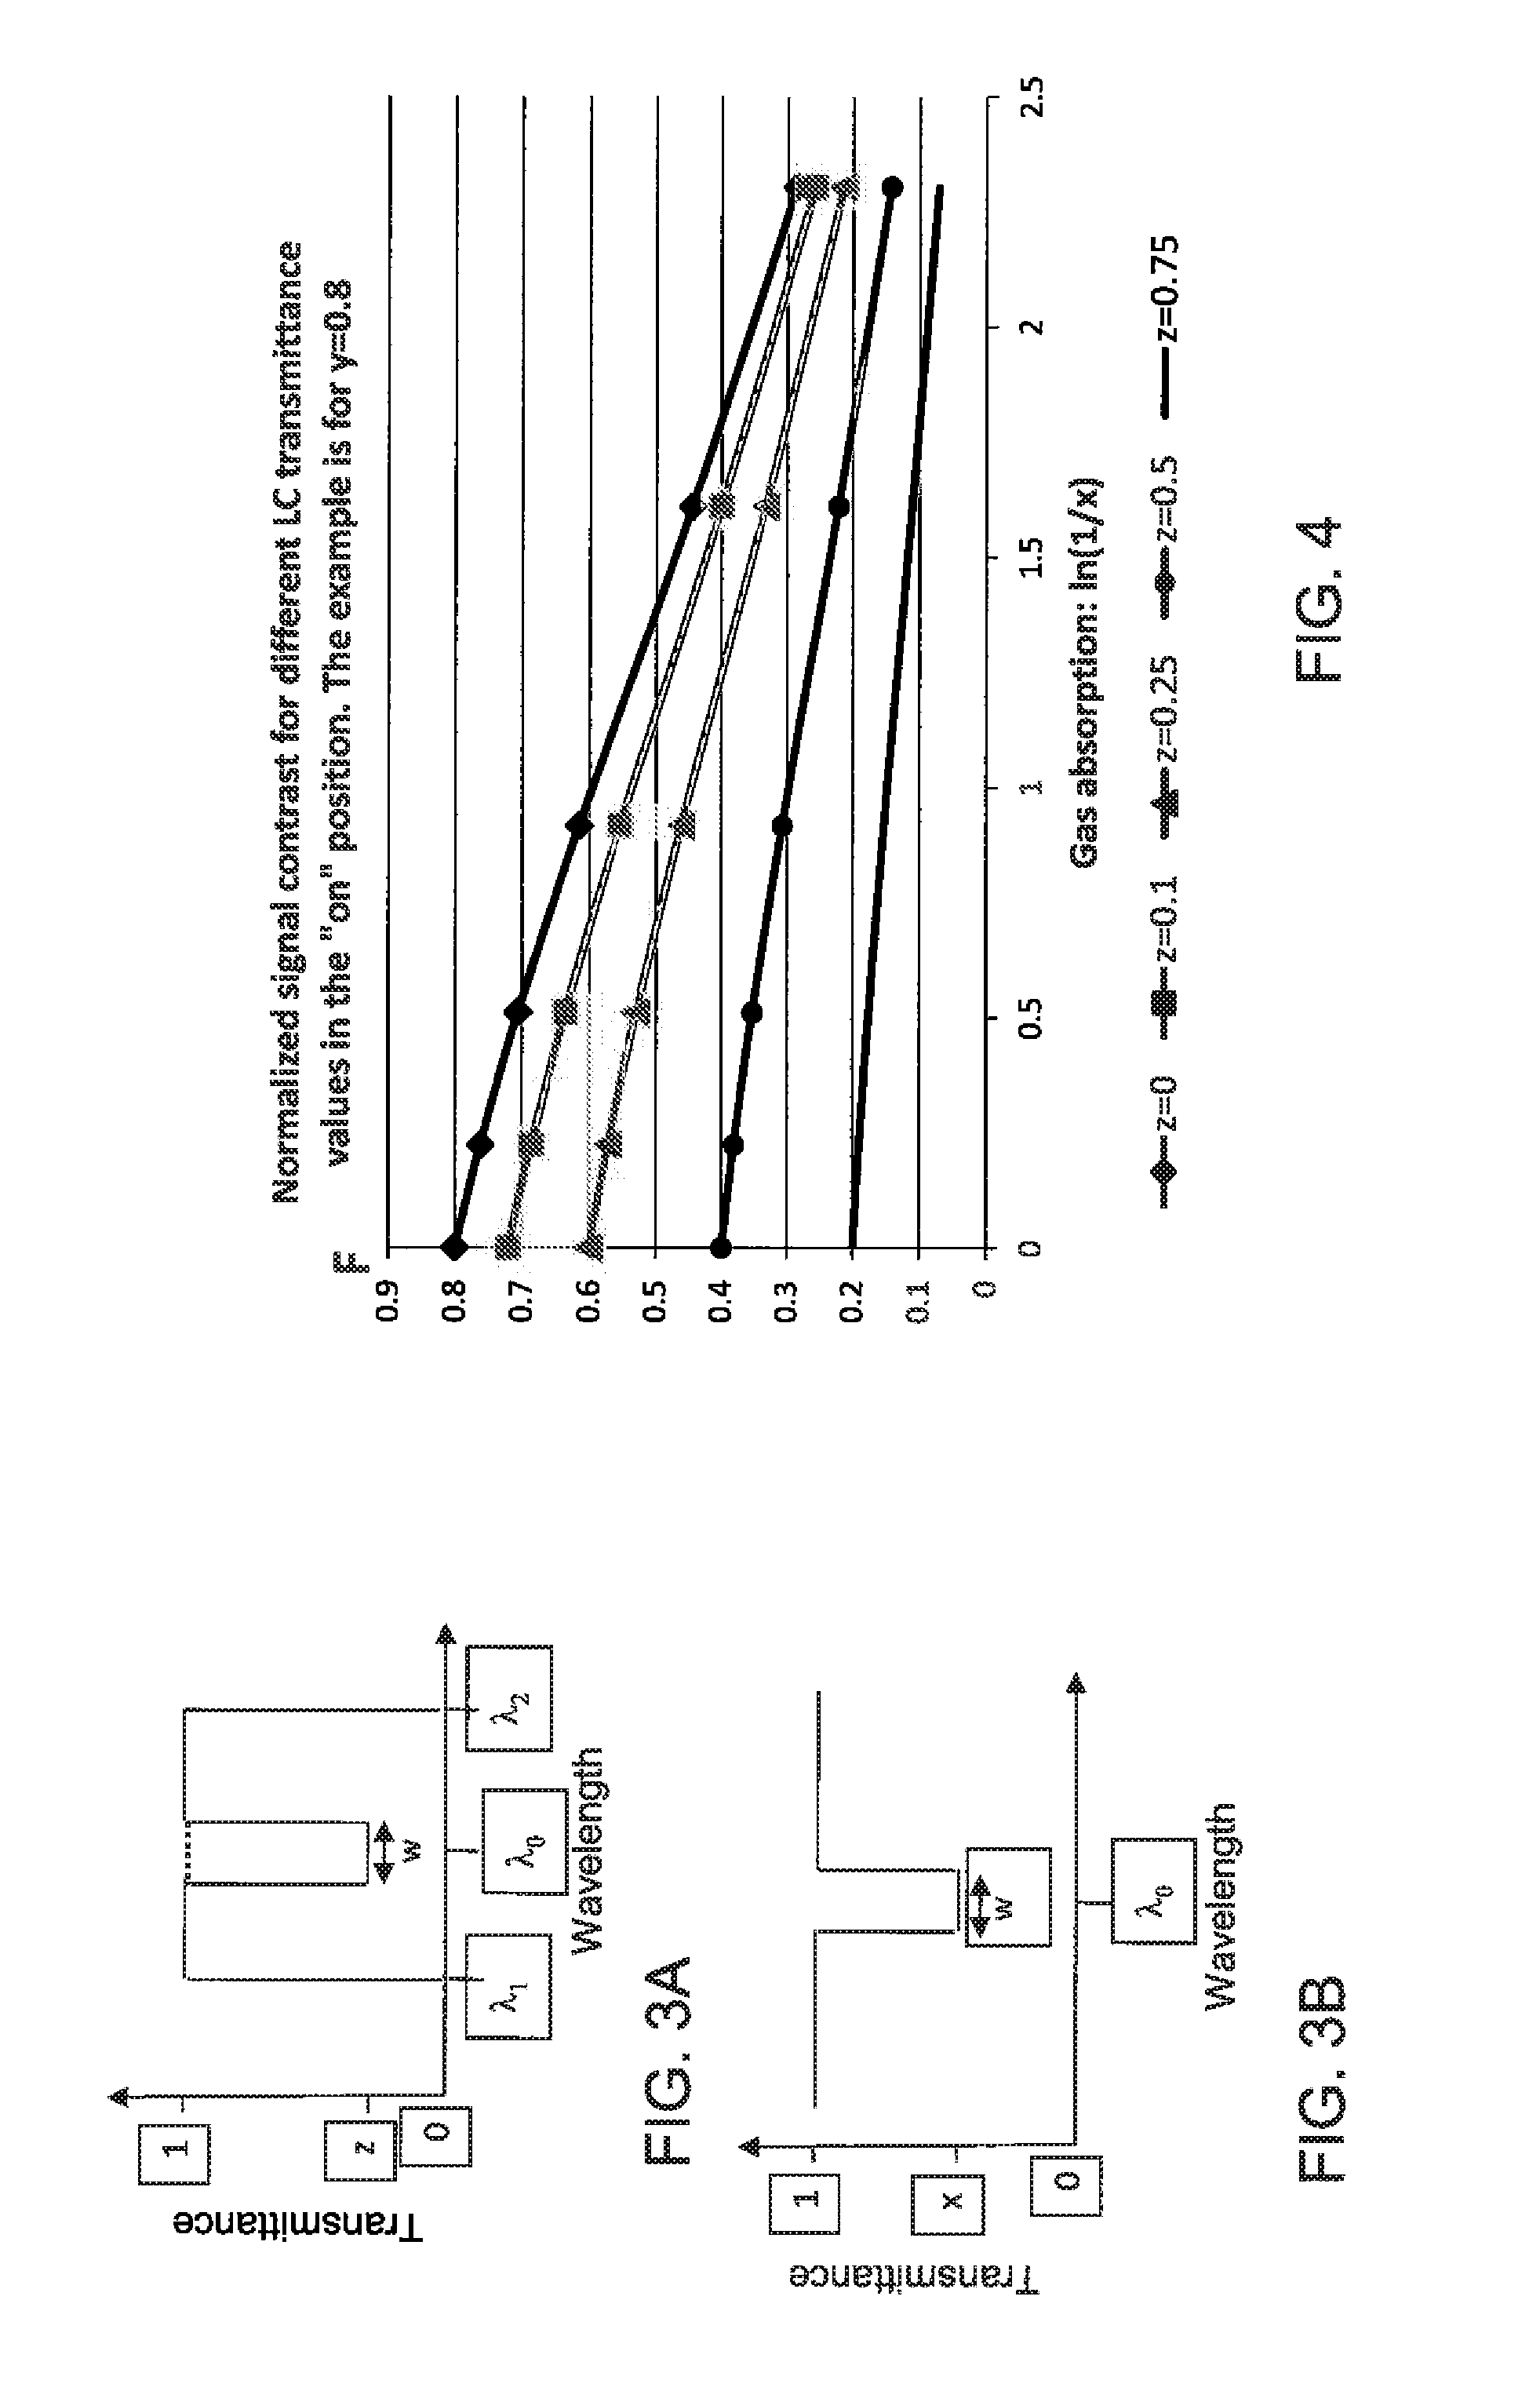 Infrared Detection and Imaging Device With No Moving Parts